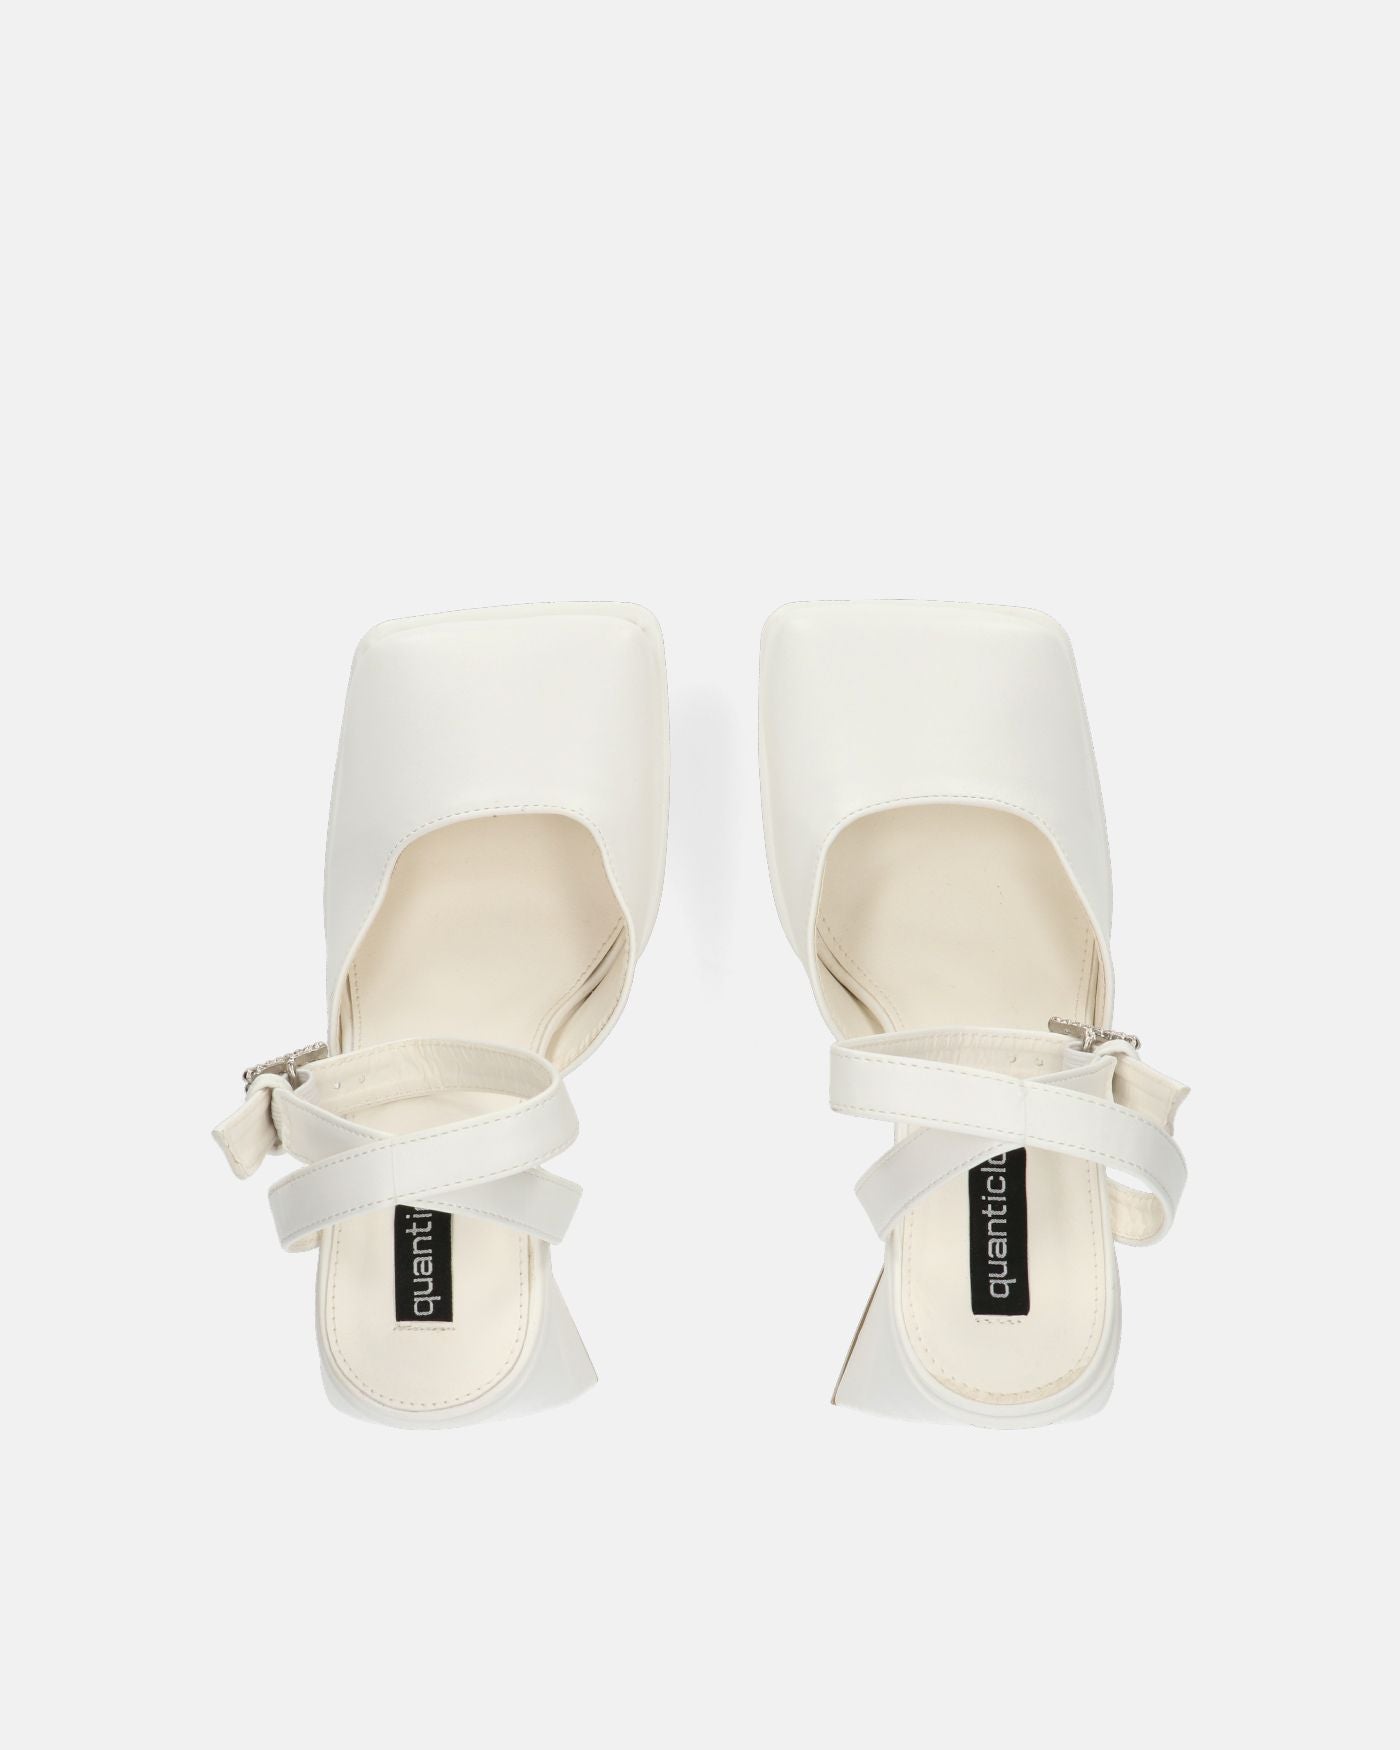 ELEANOR - white closed toe shoes with heel and strap